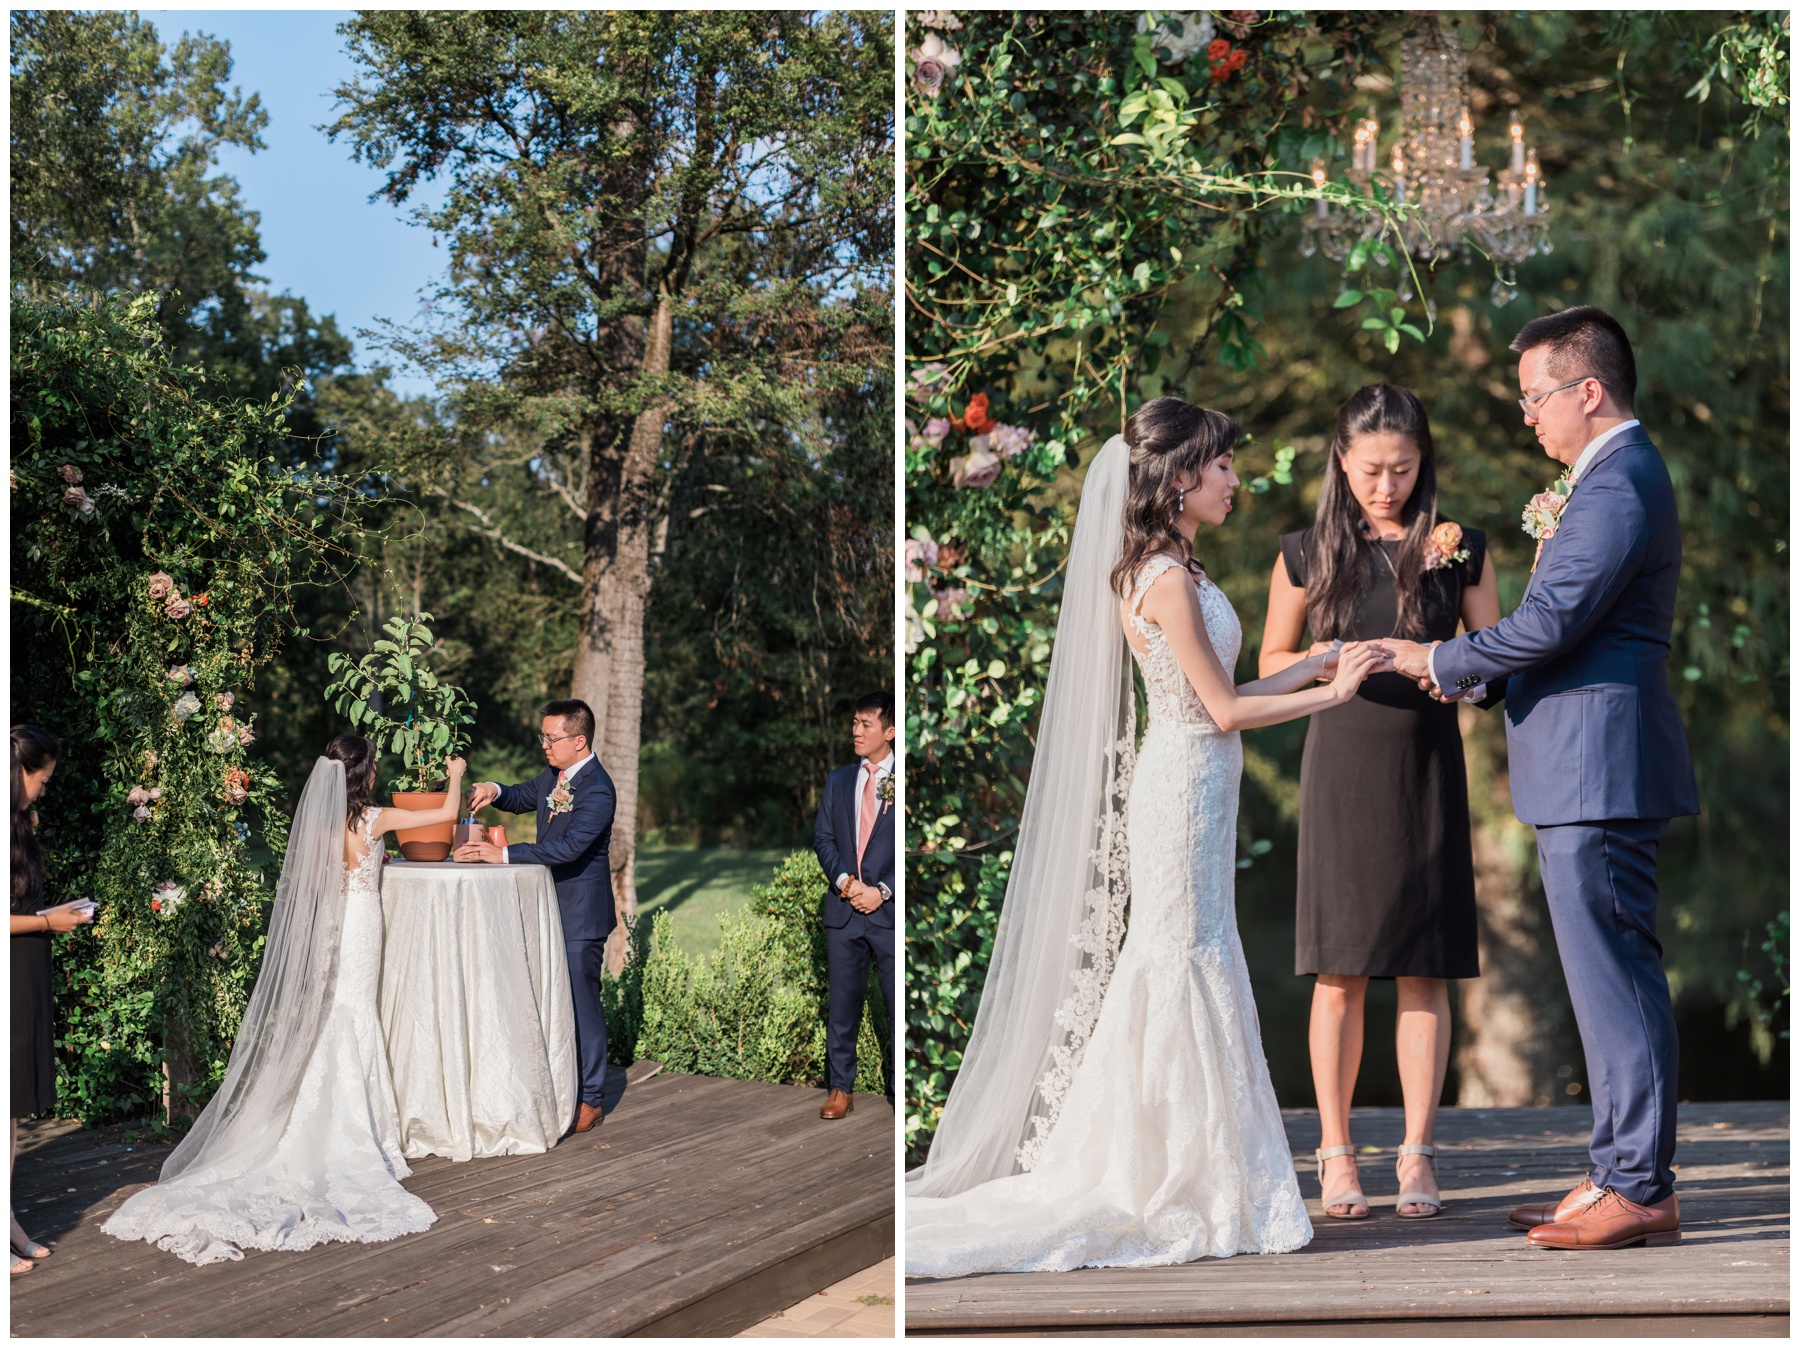 Outdoor wedding ceremony at The Carriage House